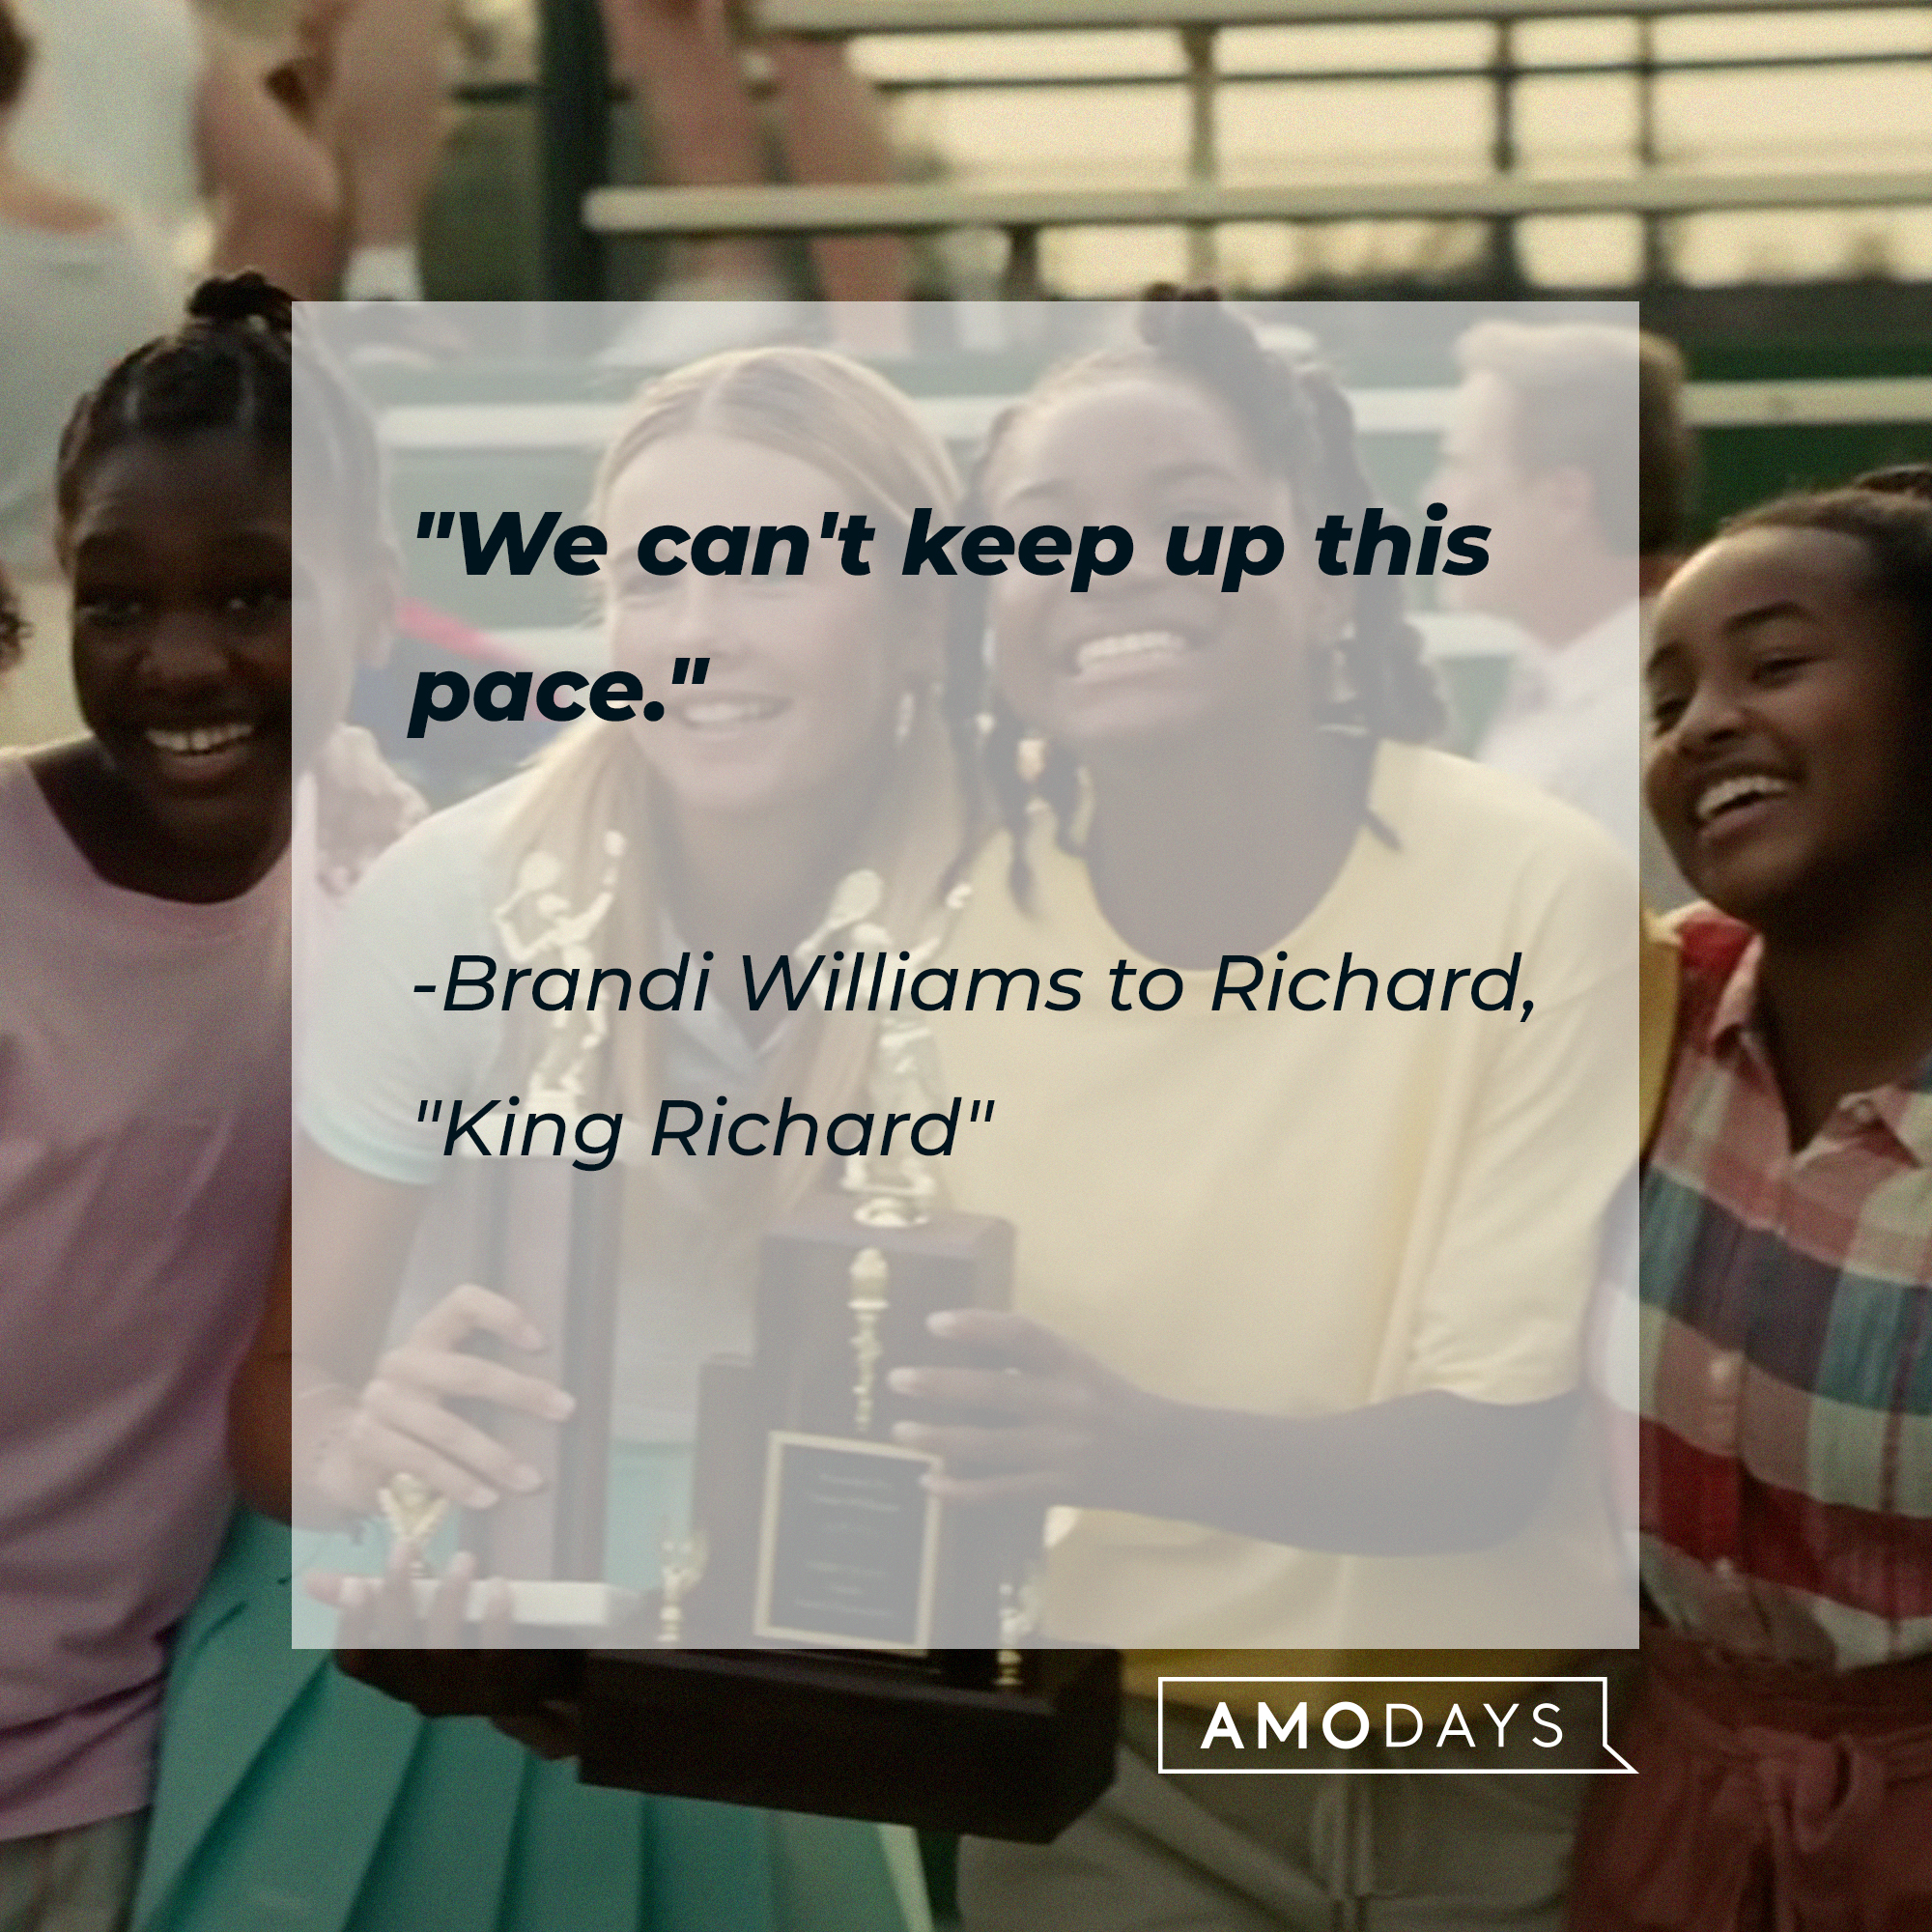 Brandi Williams‘ quote: "We can't keep up this pace." | Image: youtube.com/WarnerBrosPictures